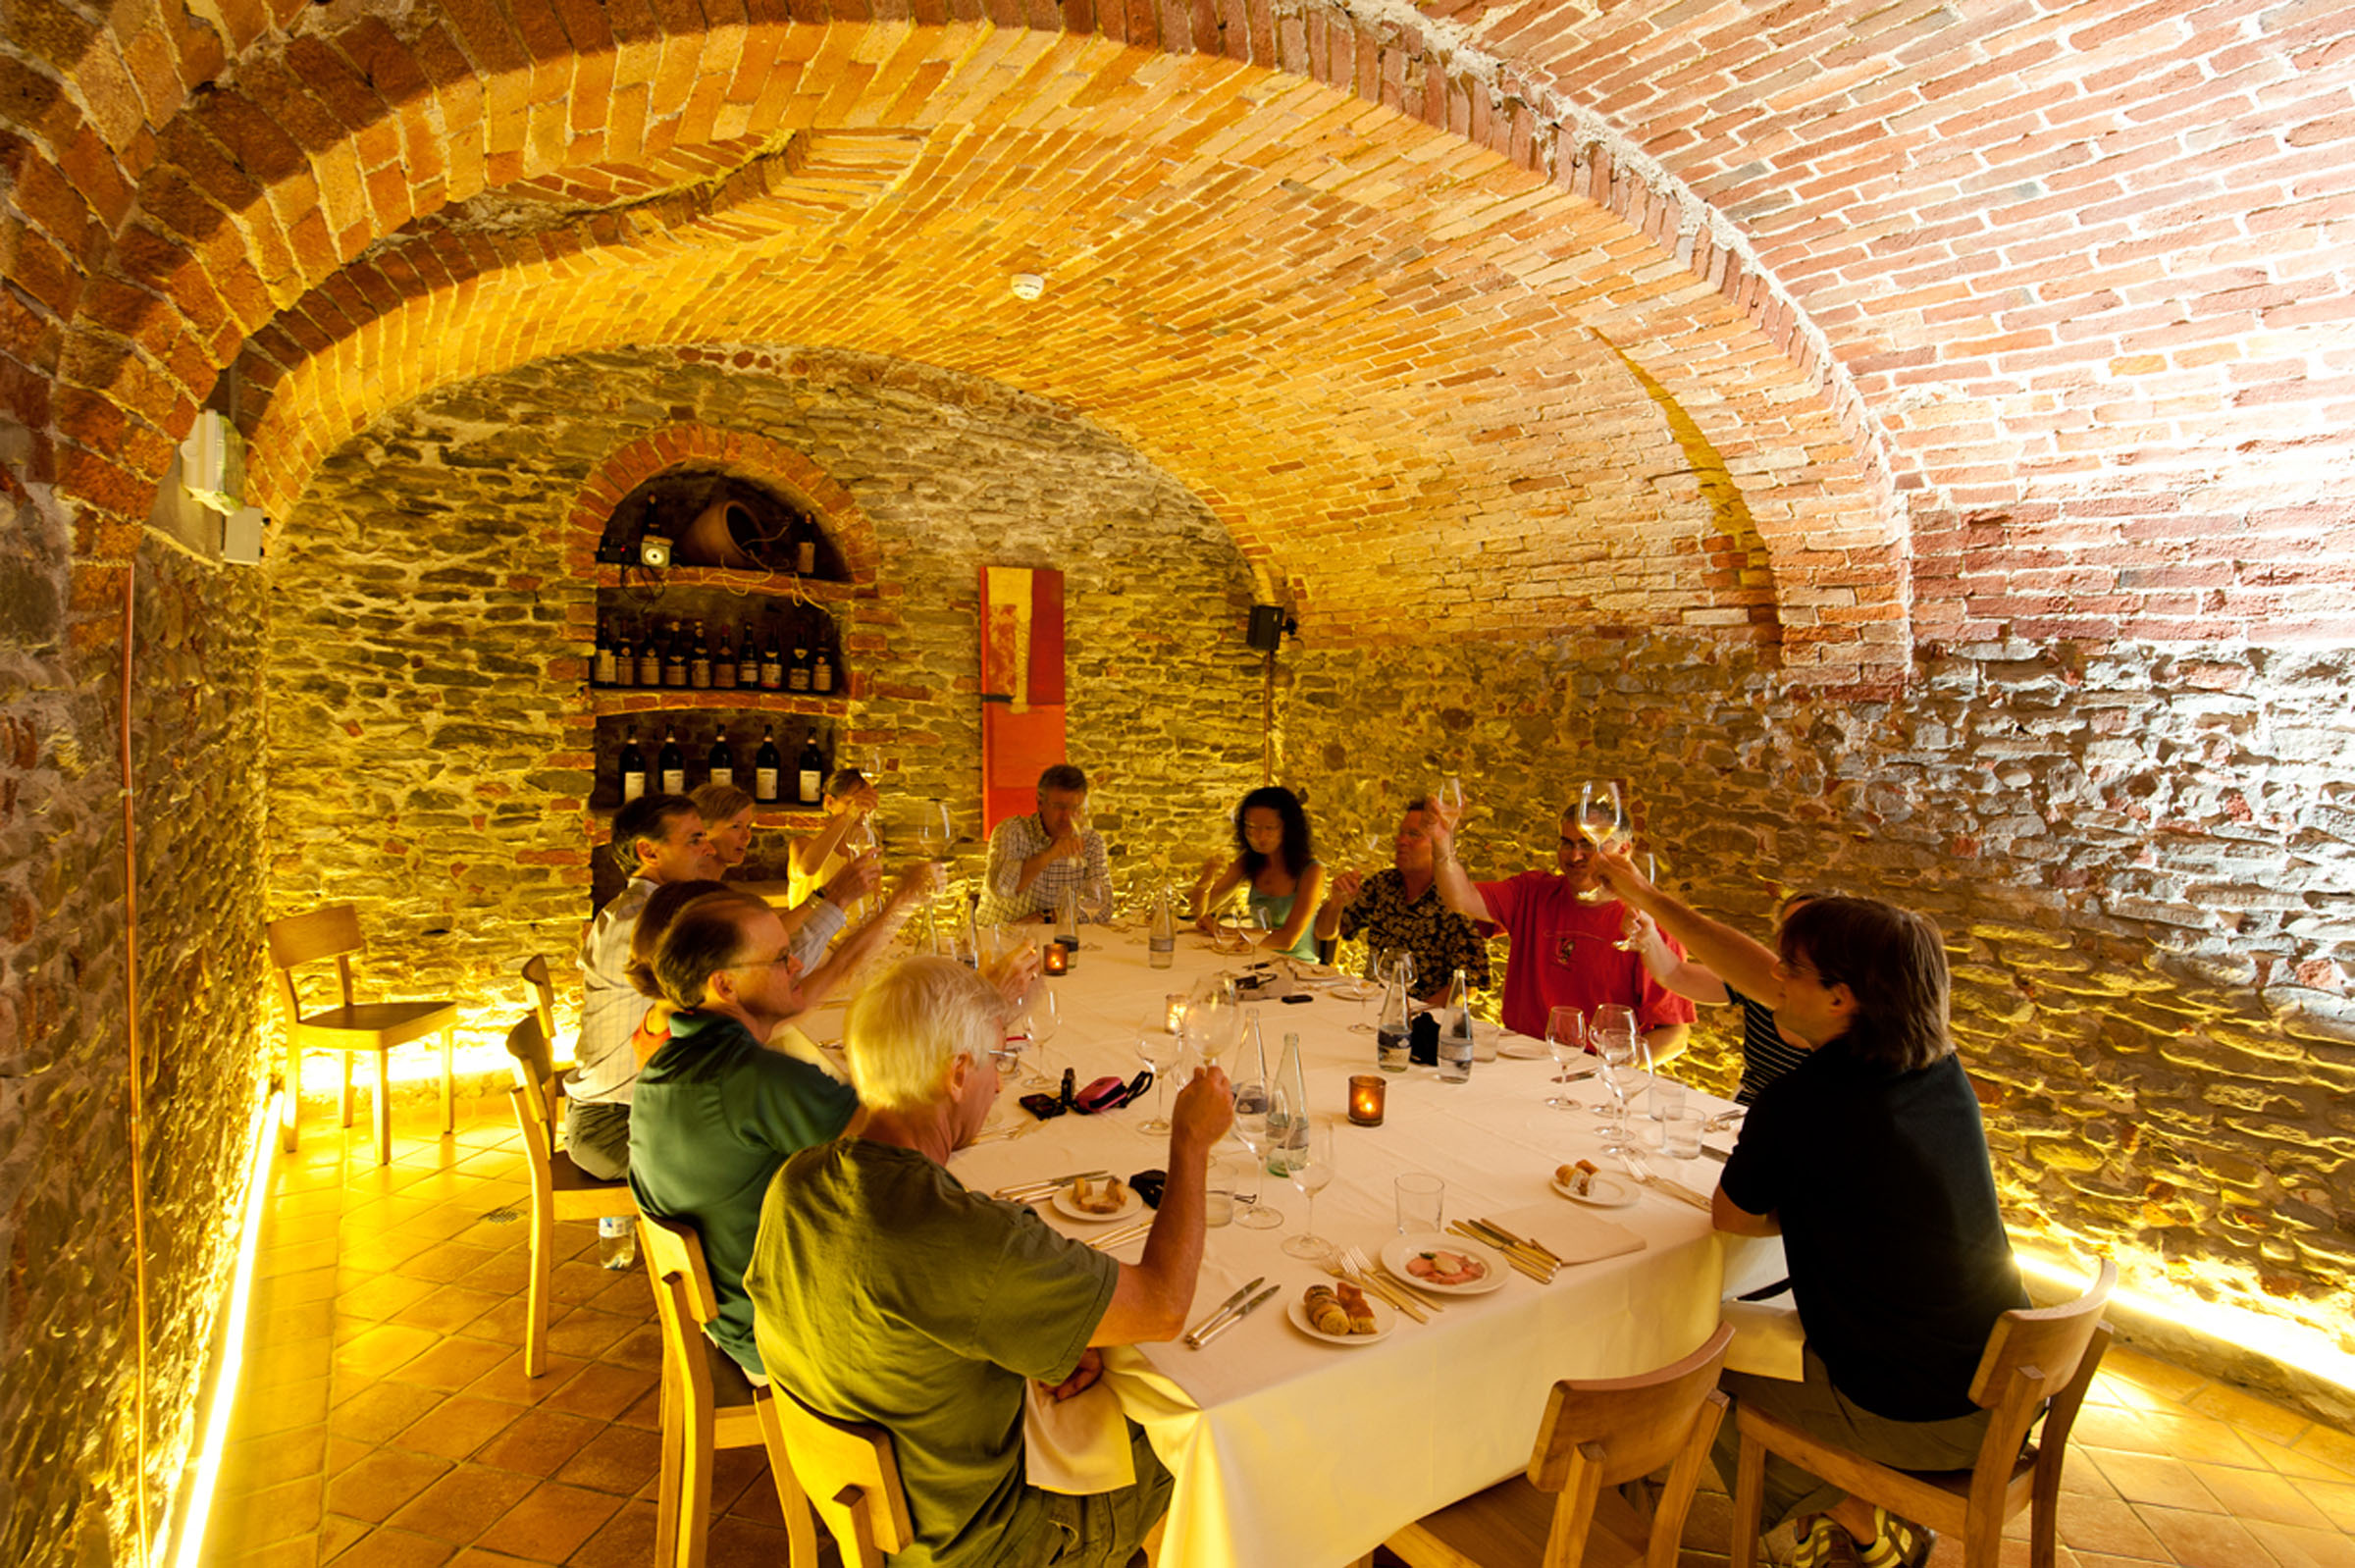 Discover both world famous and well-kept secret local wines such as Barolo, Barbaresco and Barbera, shared by vineyard owners and sommeliers.